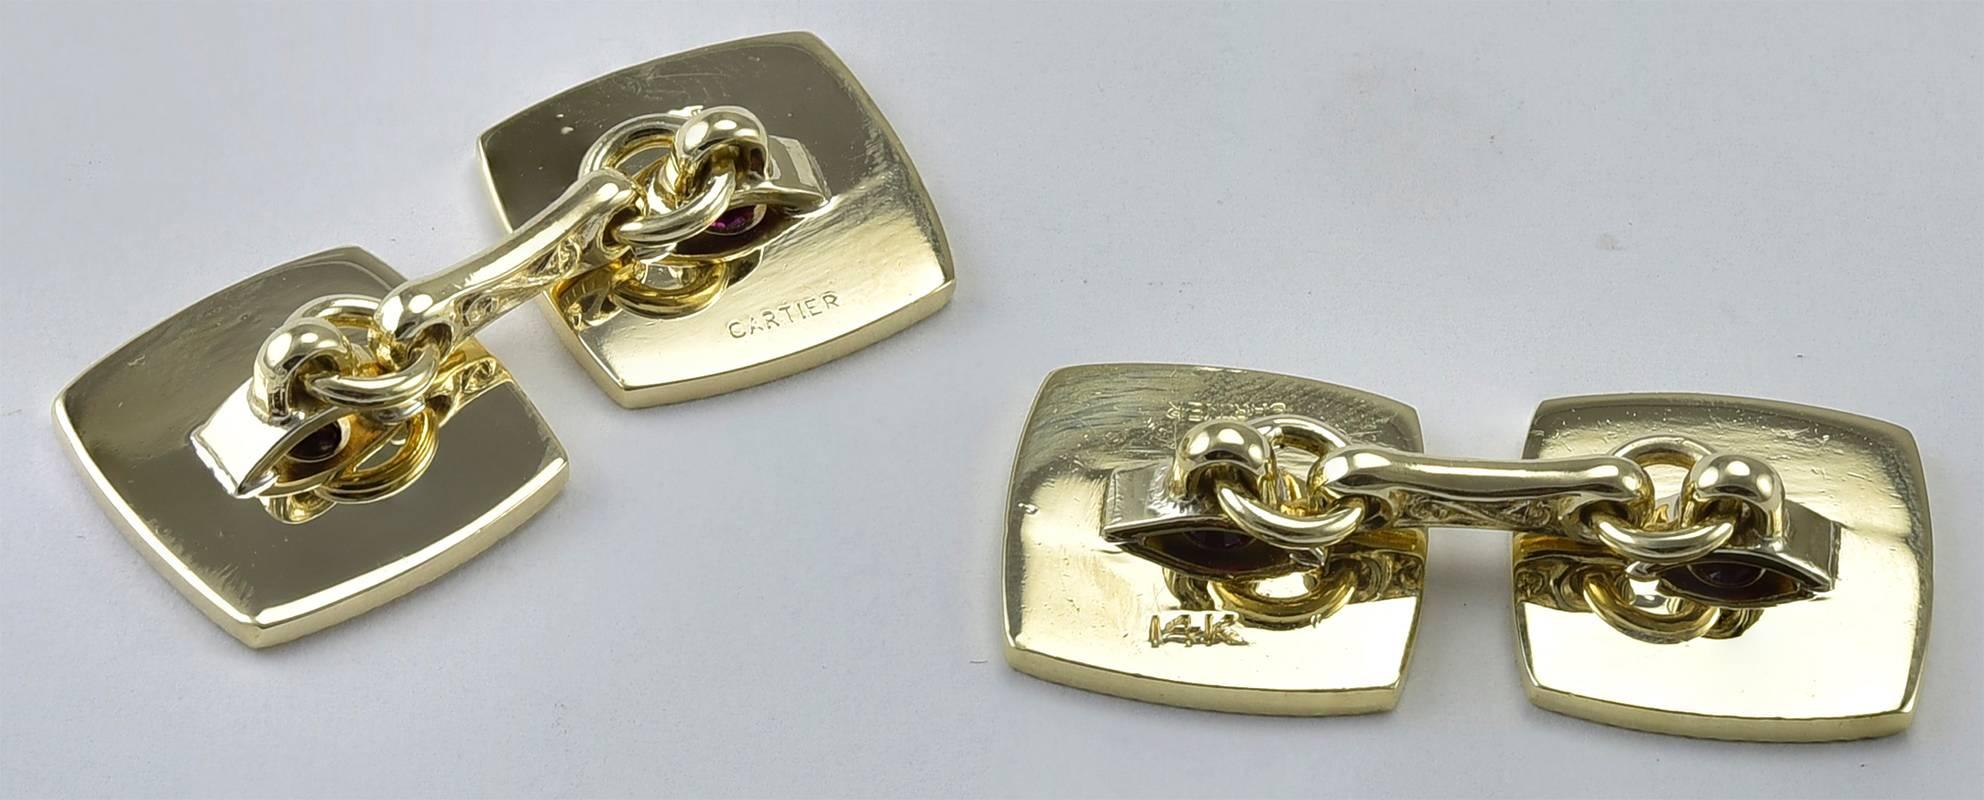 Most handsome double-sided cufflinks.  Made and signed by CARTIER. Deeply carved deco line pattern with a faceted center ruby. 14K yellow gold. Exceptionally attractive and well-done.

Alice Kwartler has sold the finest antique gold & diamond